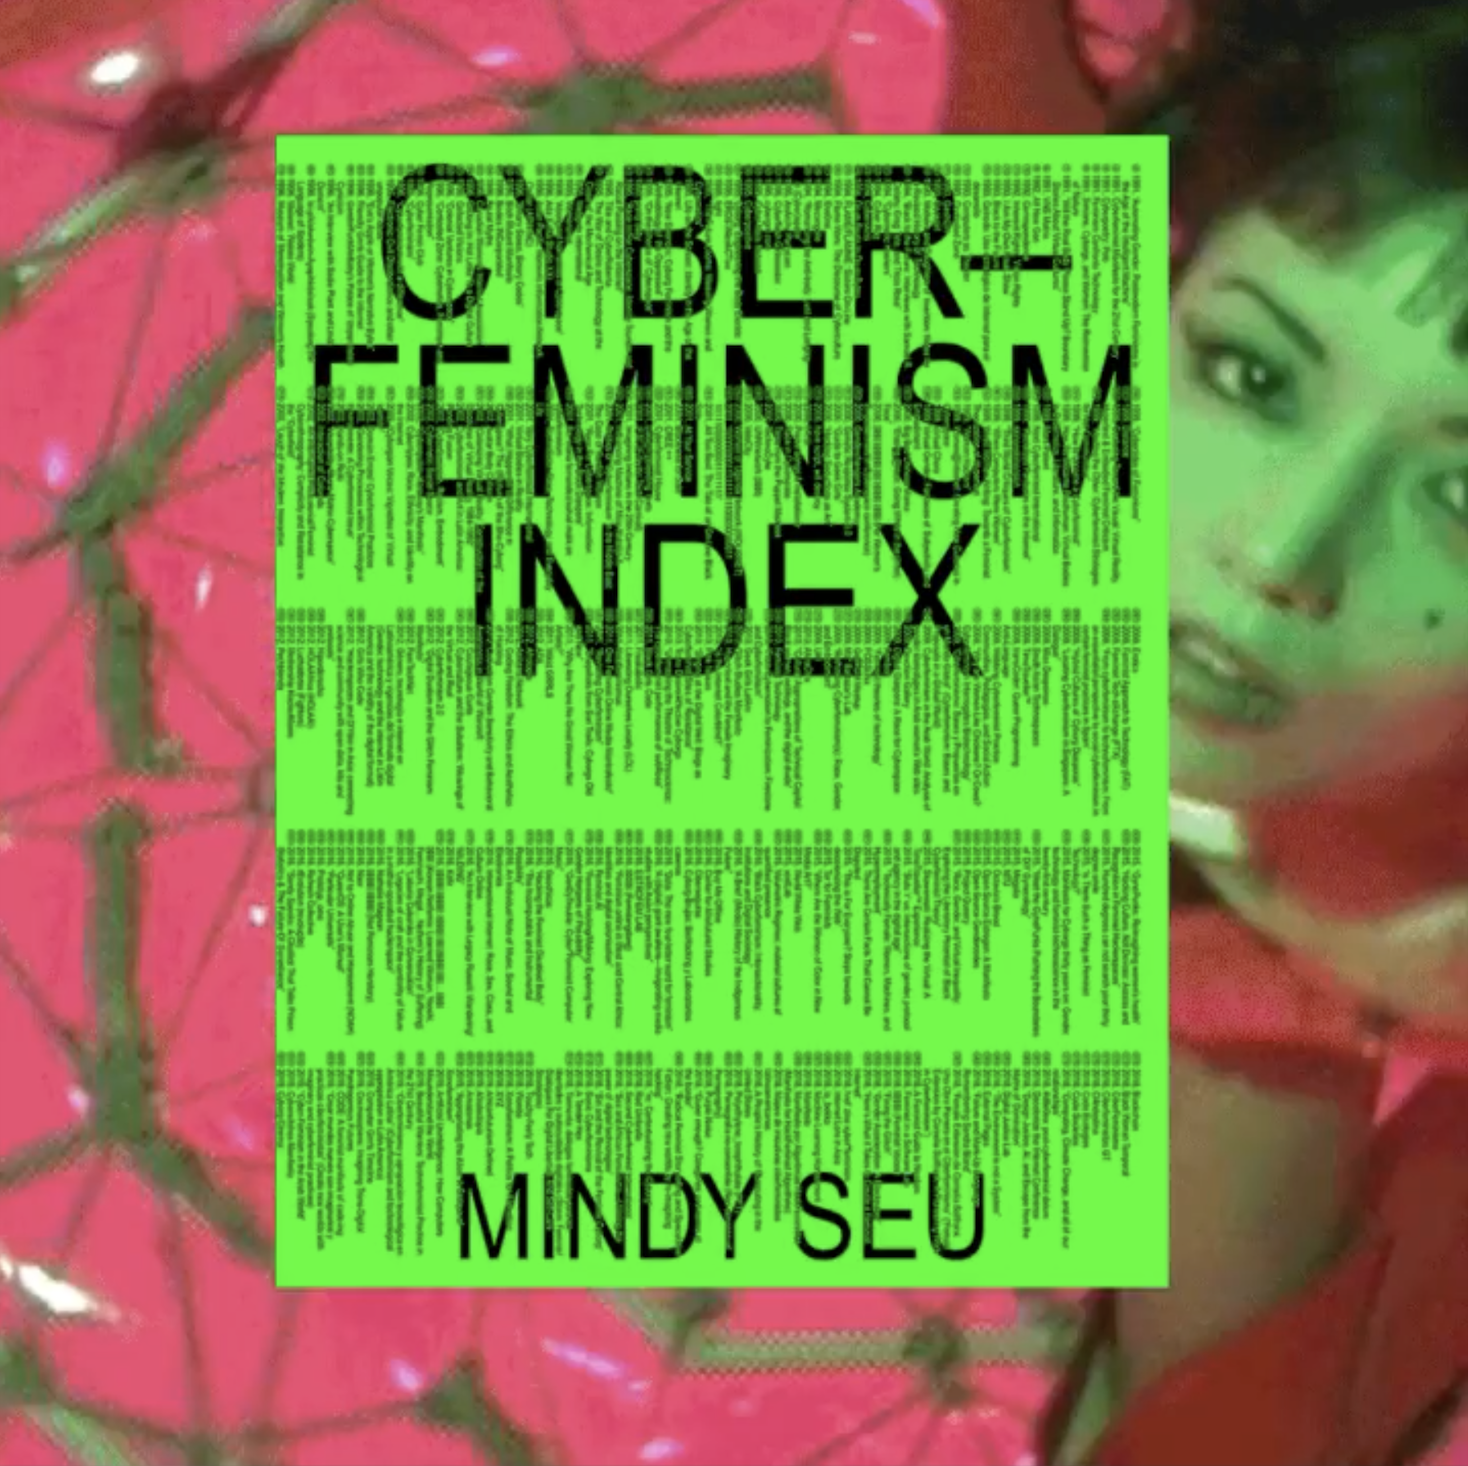 The Cyberfeminism Index book cover designed by Laura Coombs